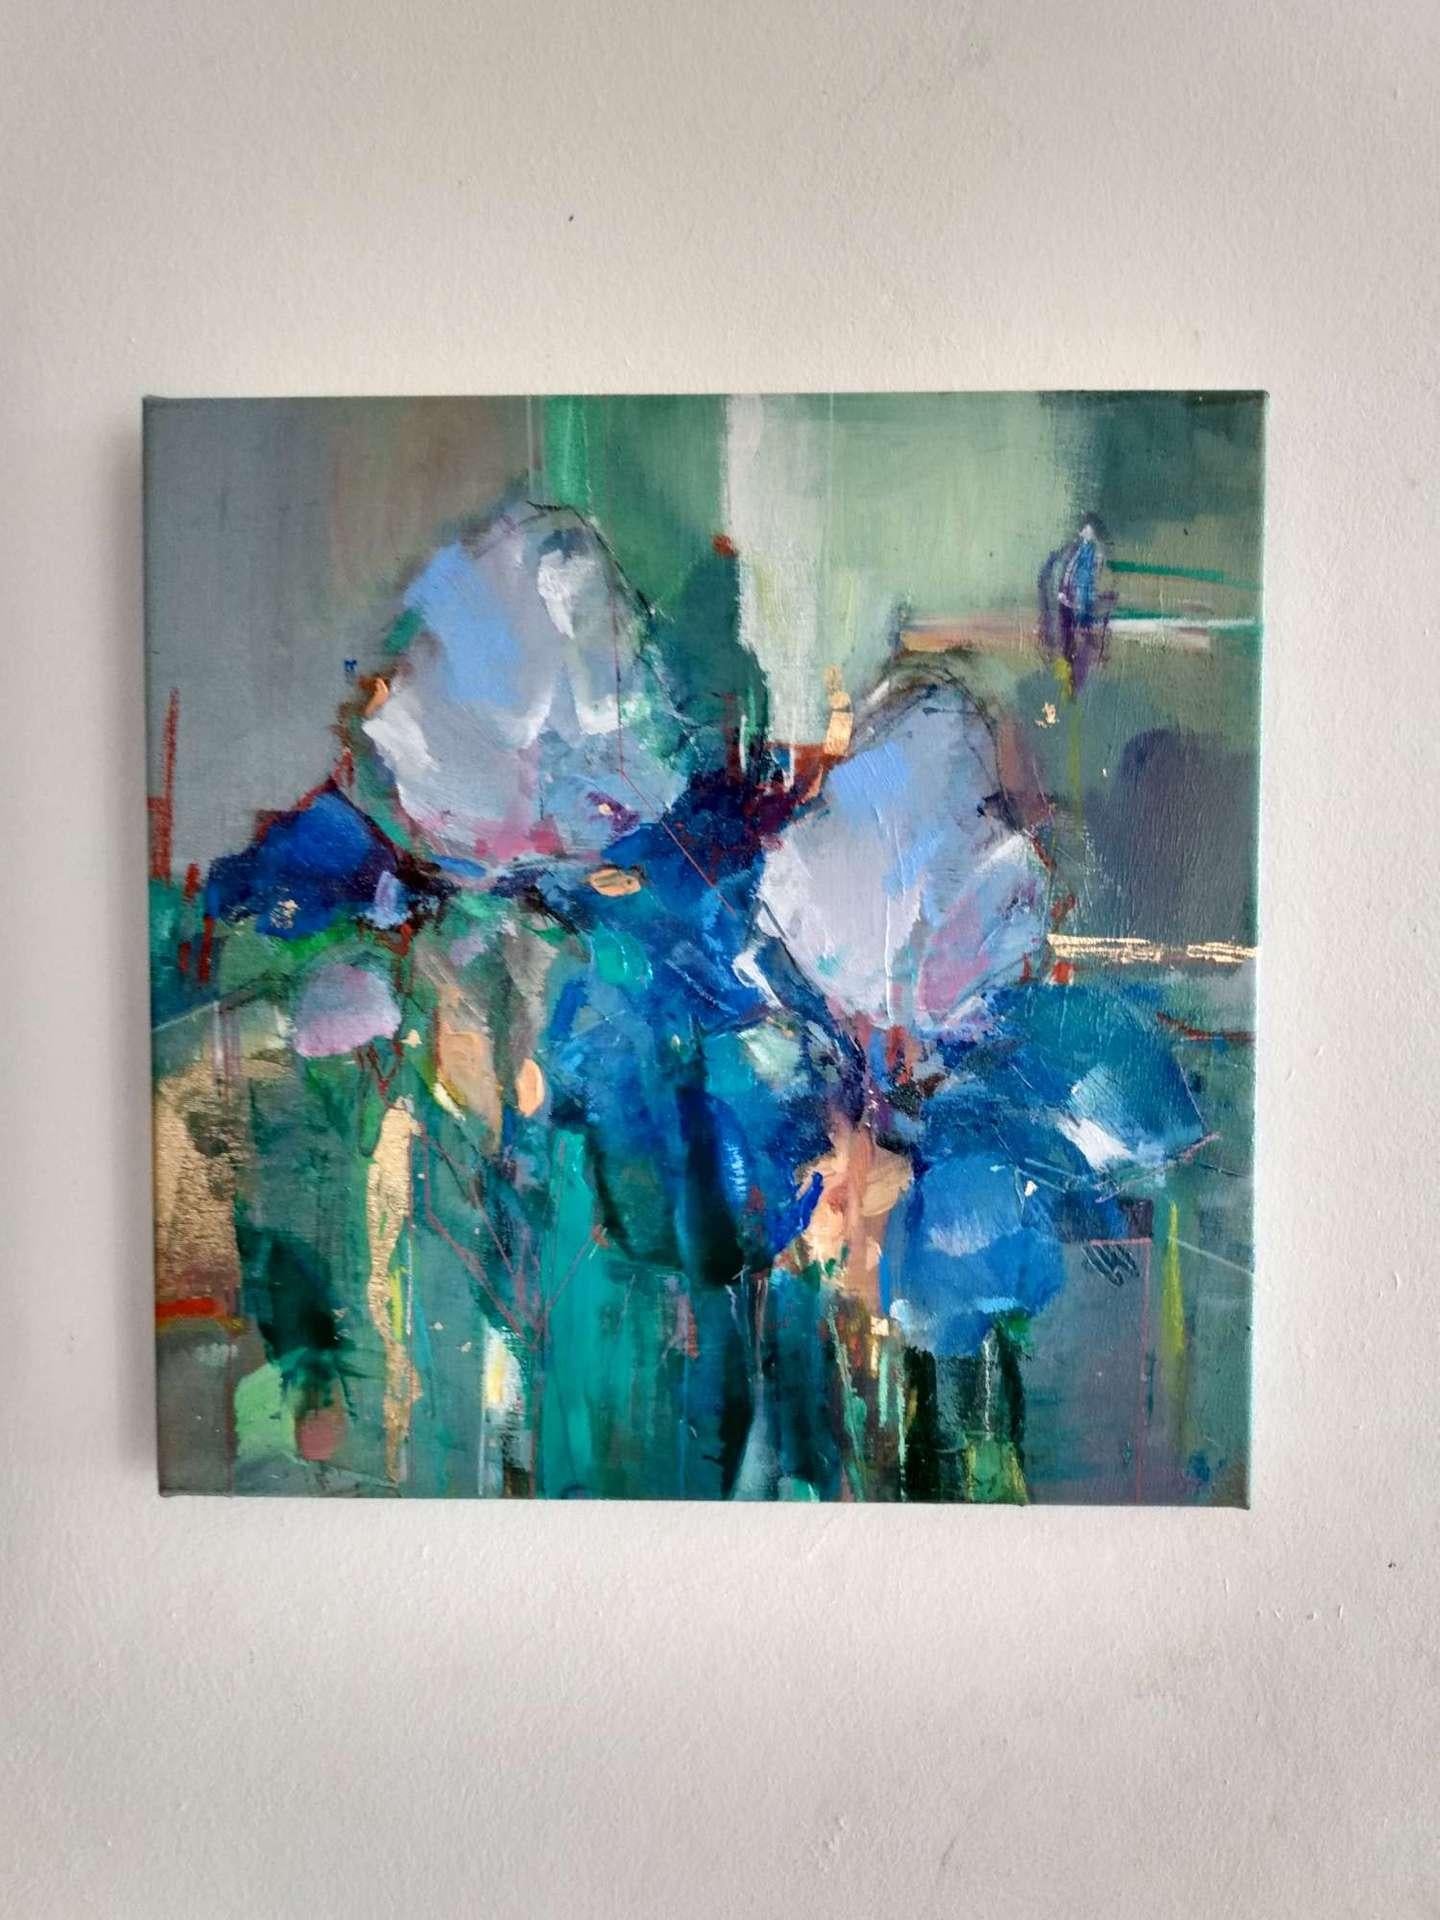 Spring Blooms 3 is an original abstract floral painting by Magdalena Morey capturing a sense of the freshness of Spring. This original mixed media floral artwork by Magdalena Morey uses a combination of acrylic paints, pastels and gold leaf on a